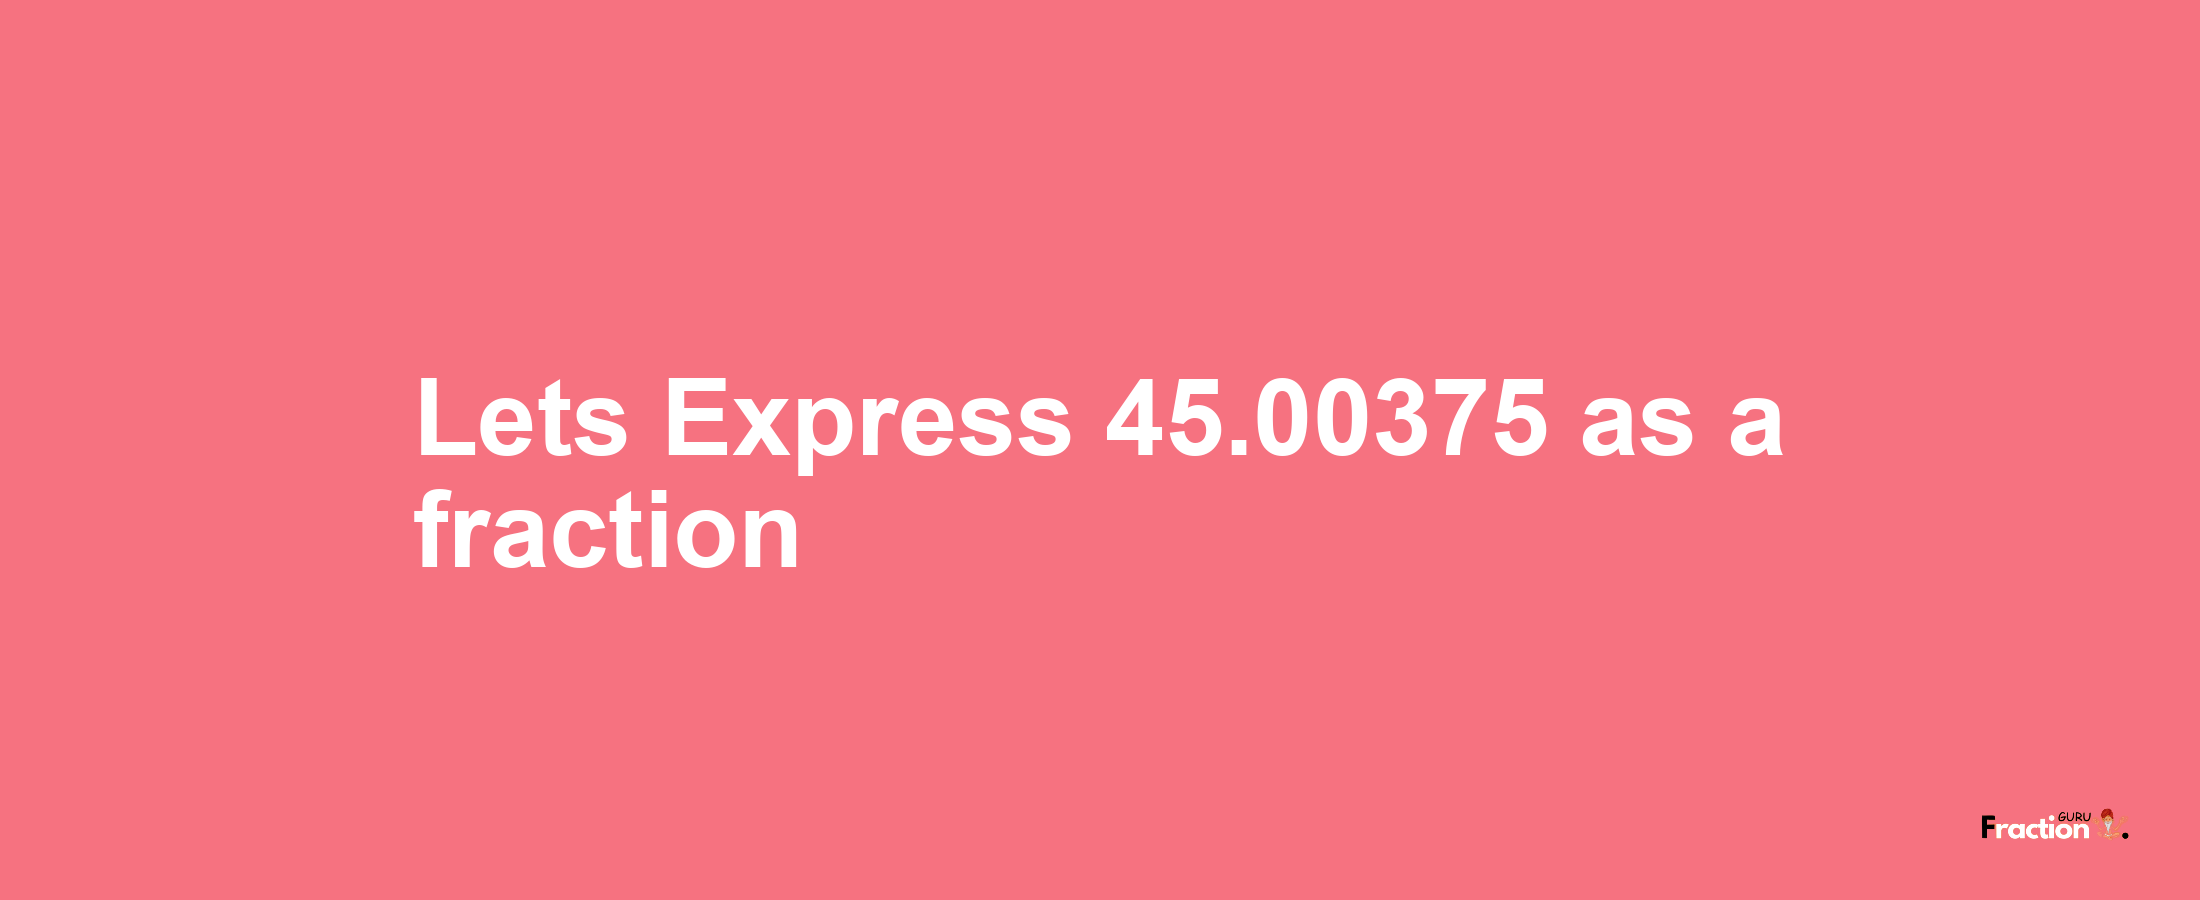 Lets Express 45.00375 as afraction